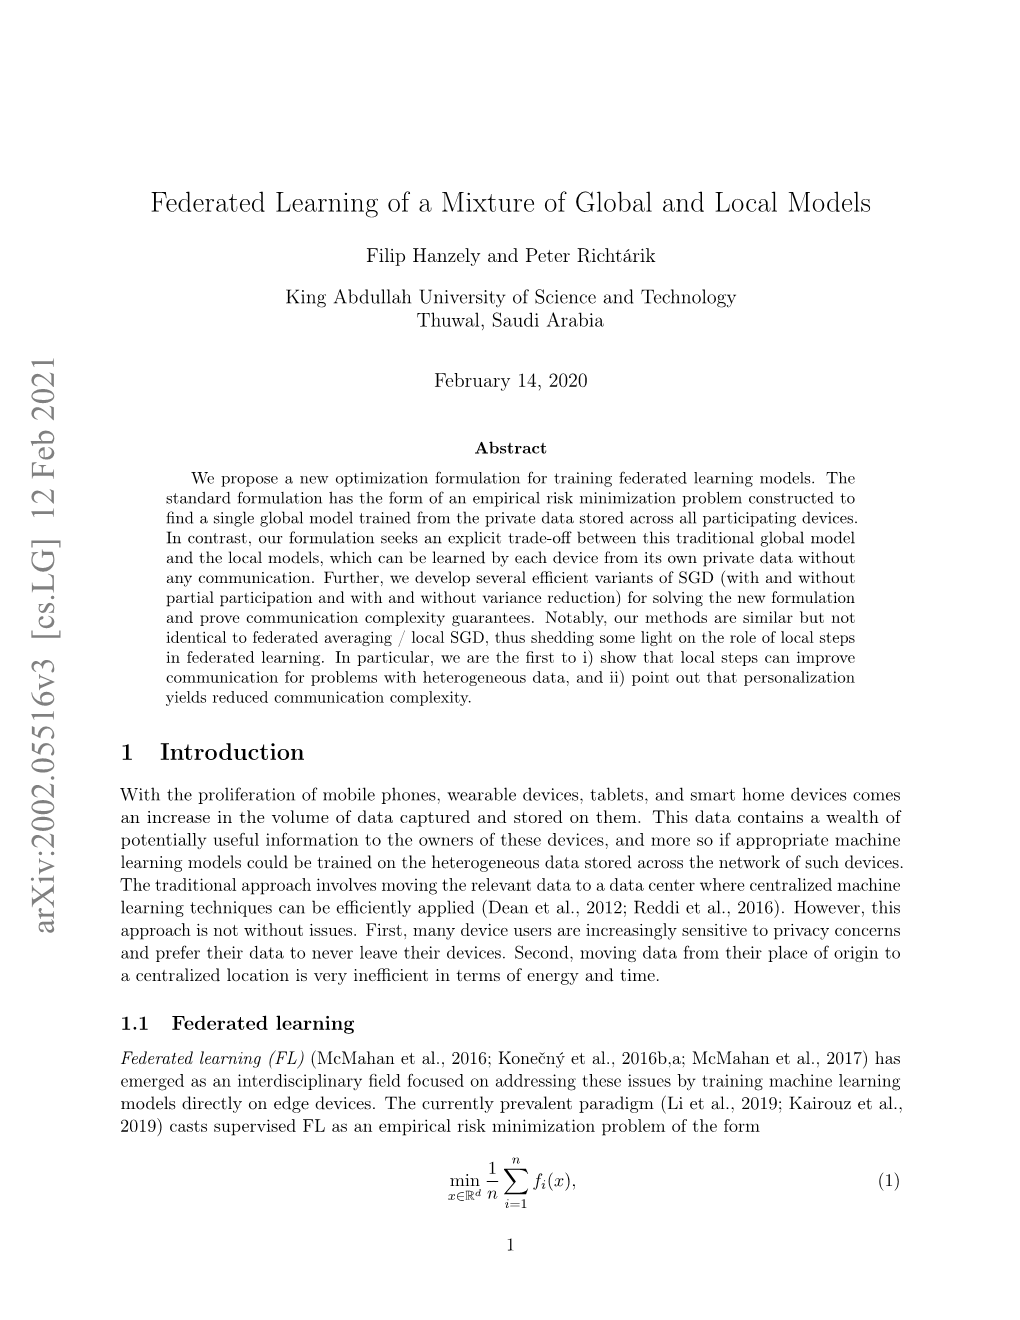 Federated Learning of a Mixture of Global and Local Models